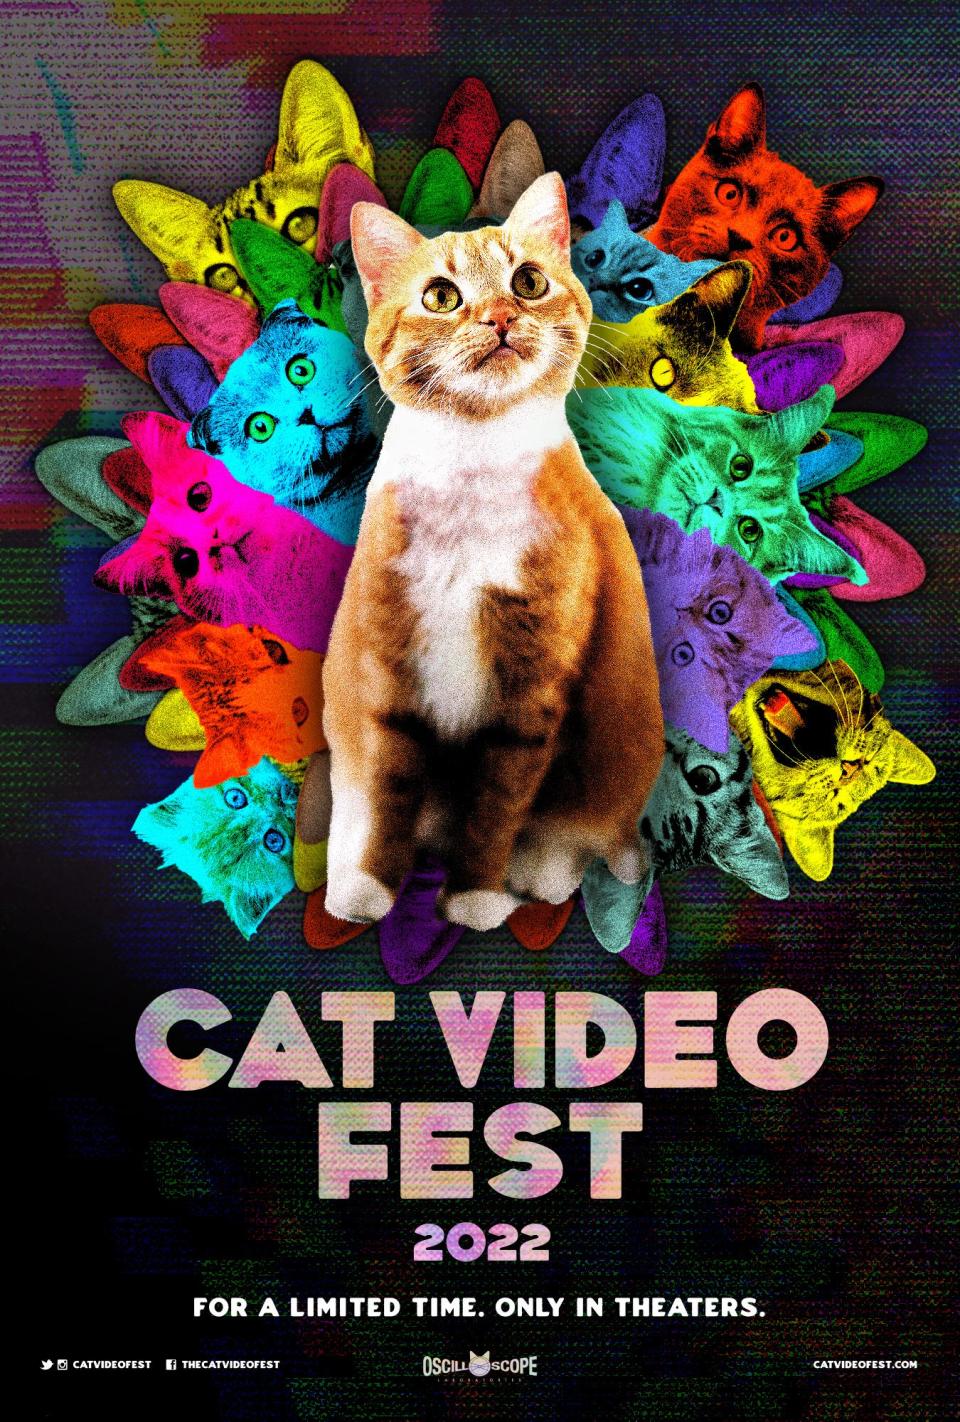 A promotional image of CatVideoFest 2022.